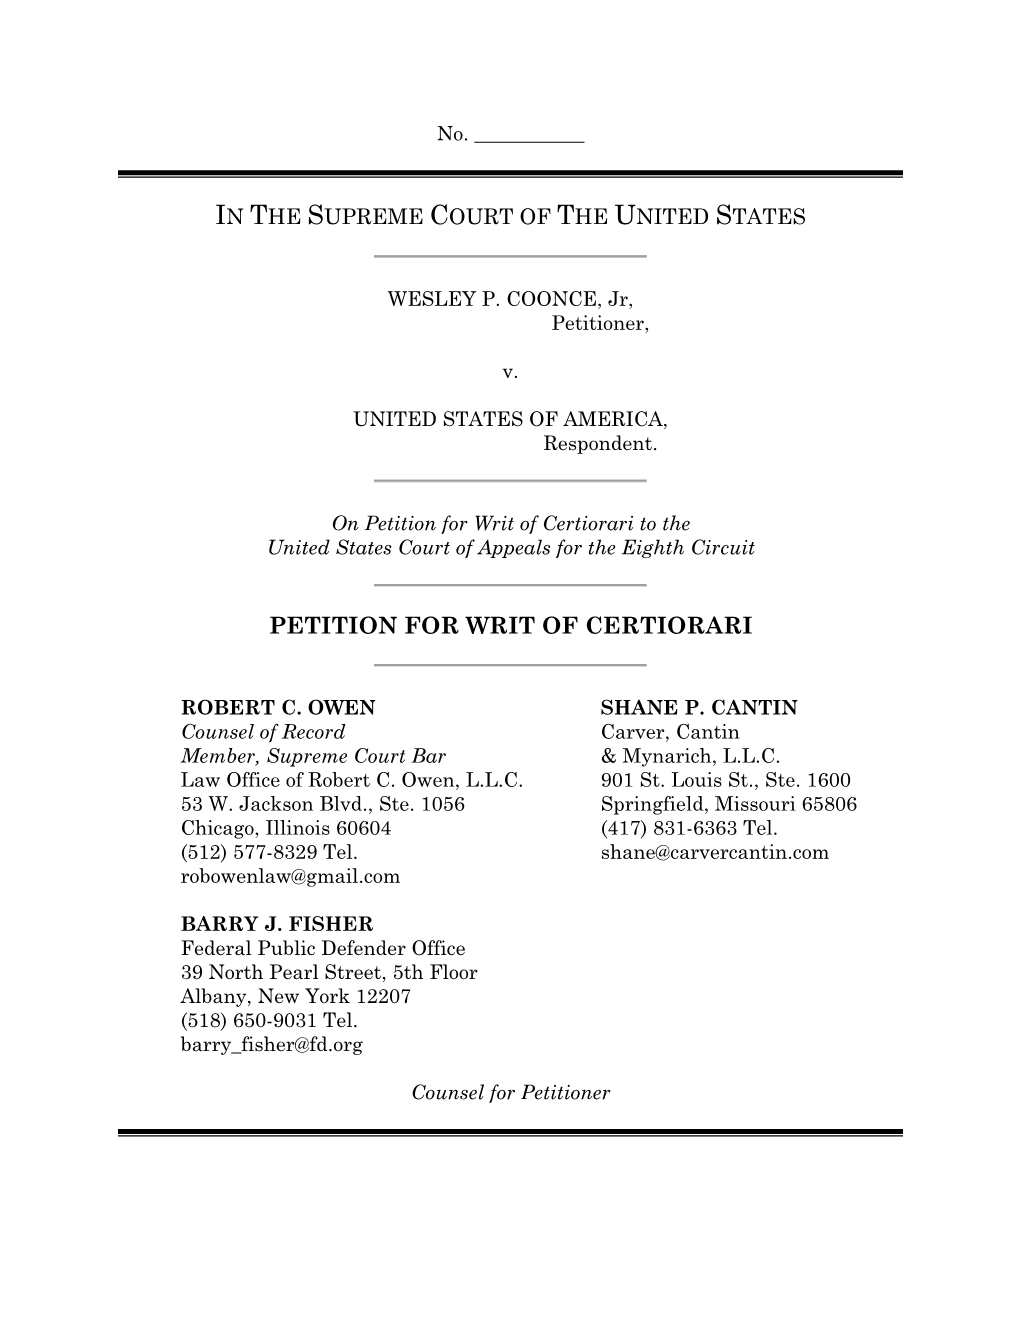 Petition for Writ of Certiorari to the United States Court of Appeals for the Eighth Circuit